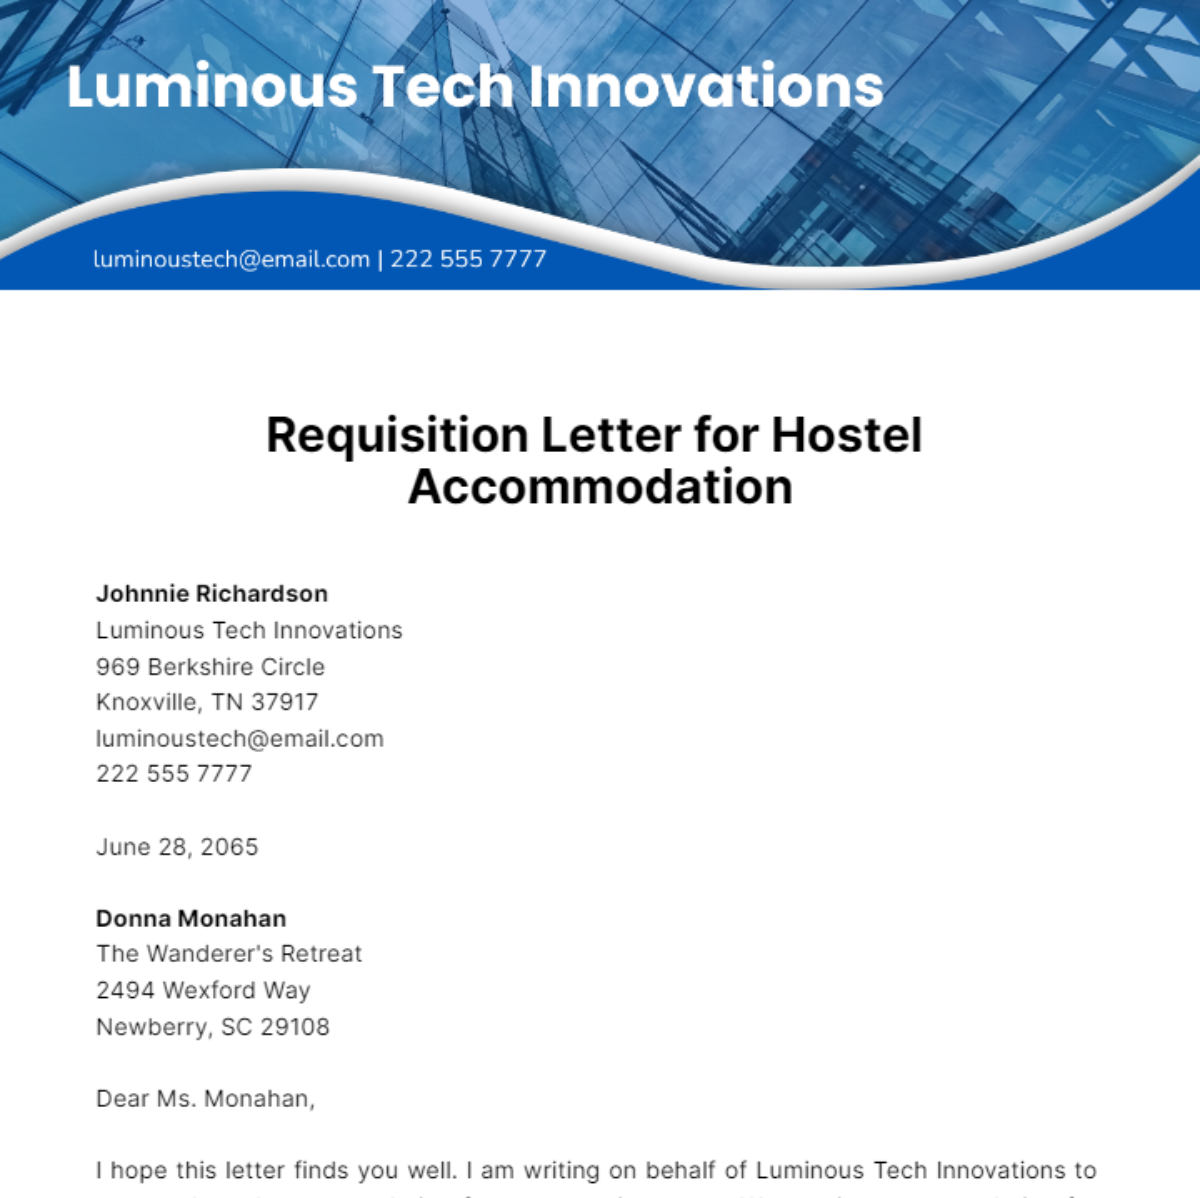 Requisition Letter for Hostel Accommodation Template